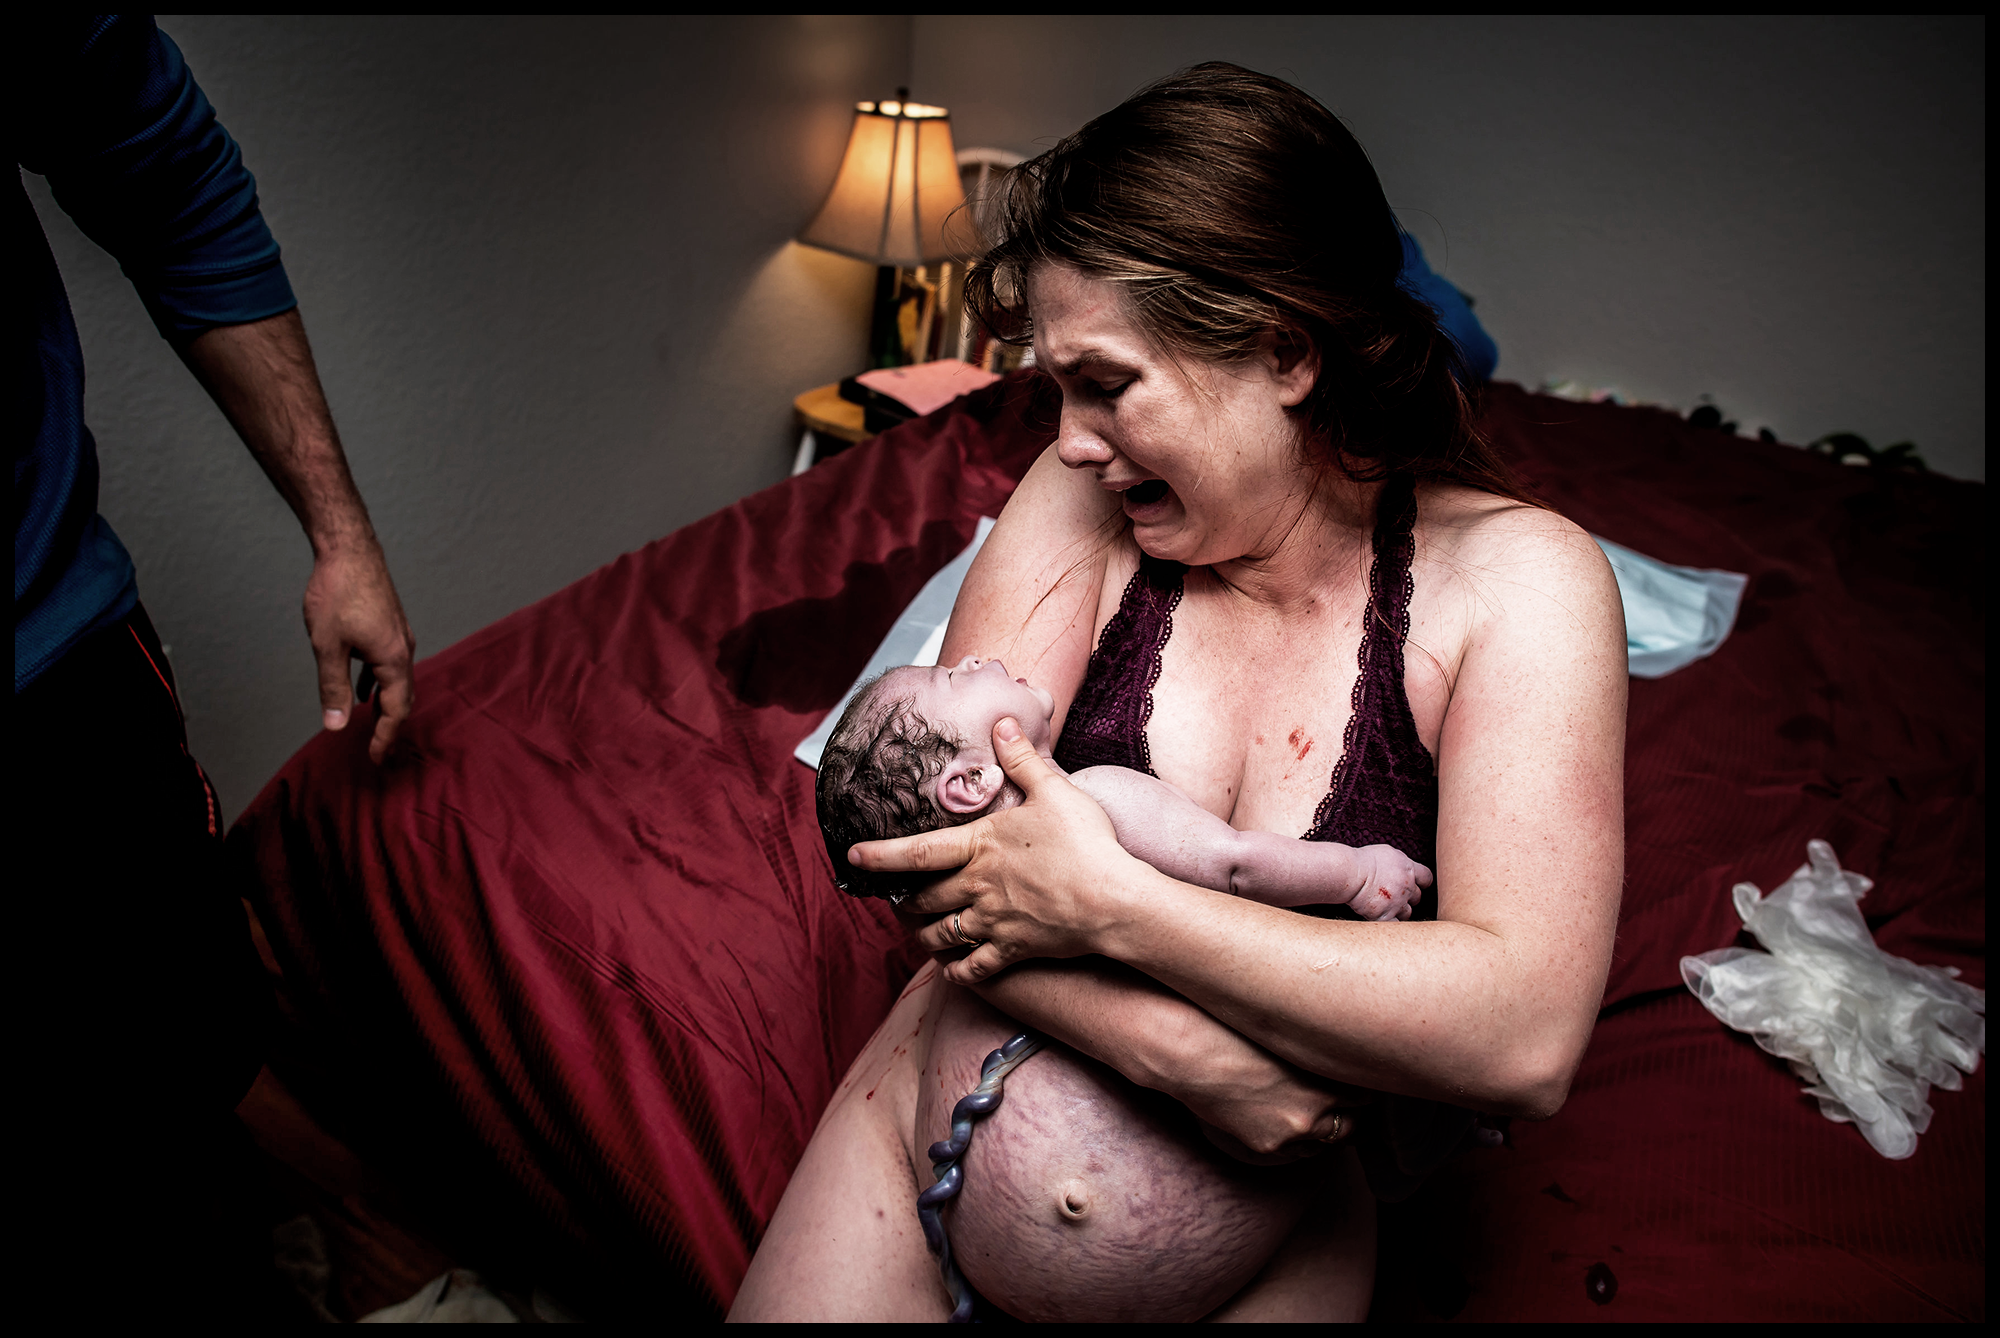 Pregnant Nude Delivery - Empowered Birth Project Fights Childbirth Photos Being Censored on Instagram